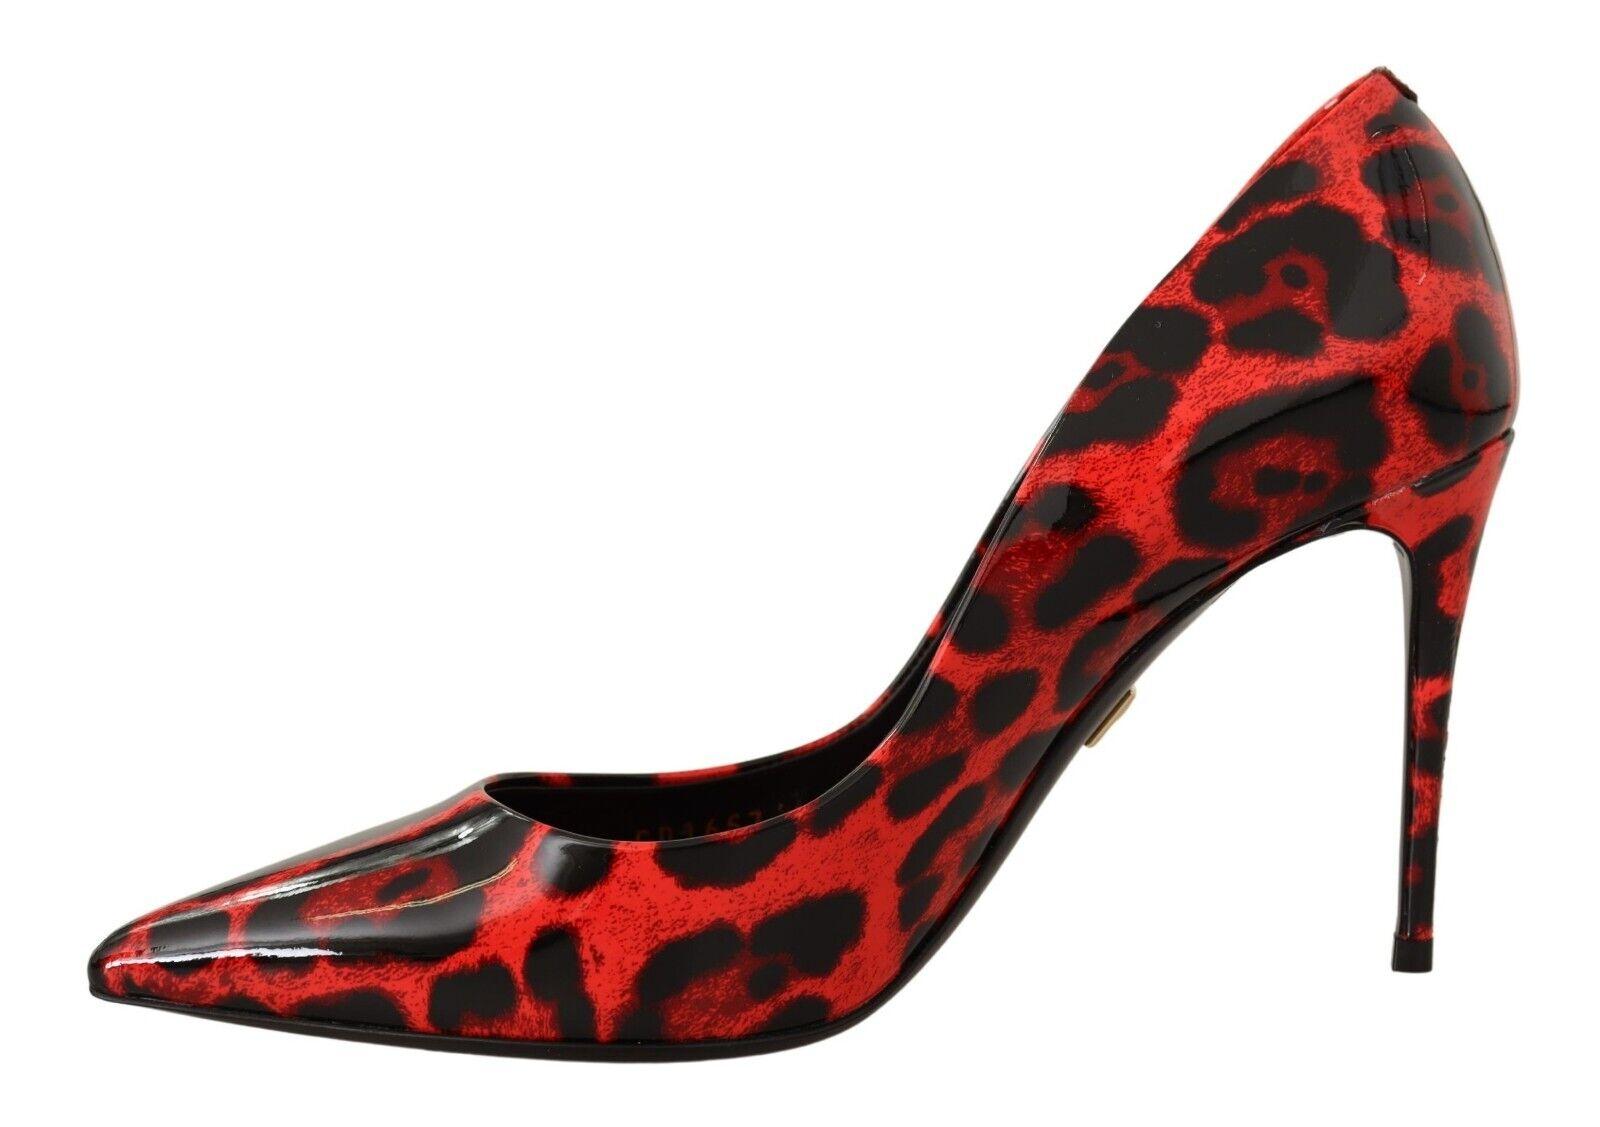 DOLCE & GABBANA



Gorgeous brand new with tags, 100% Authentic Dolce & Gabbana Pumps features pointed close toe, stiletto heel and leopard print.



Model: Heels pumps
Material: 100% Leather
Color: Red black leopard pattern

Leather bottom